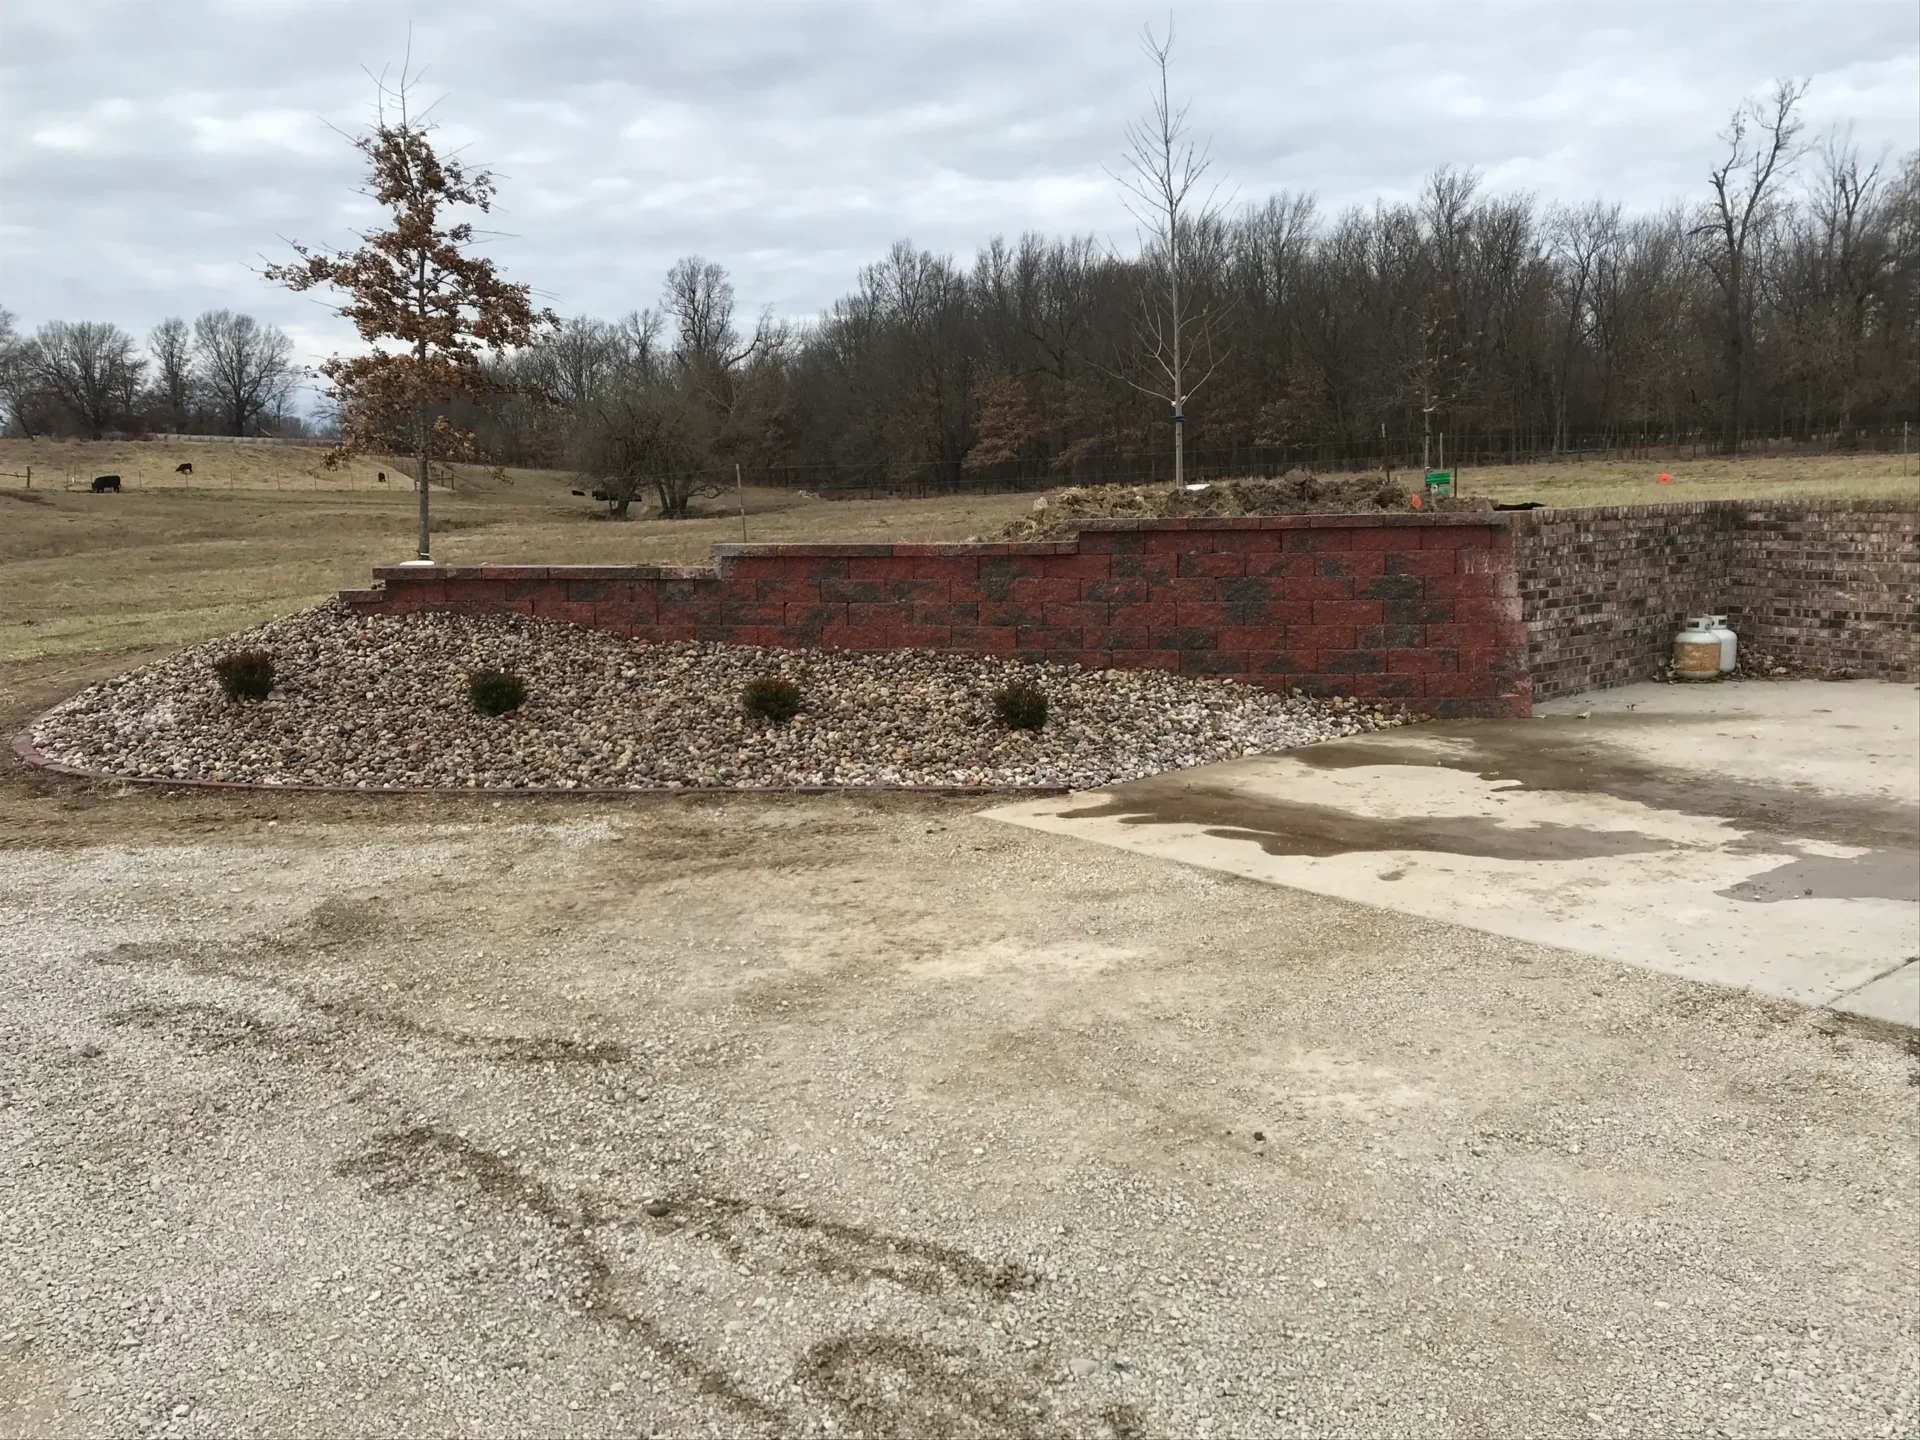 A brick wall in the middle of an empty lot.